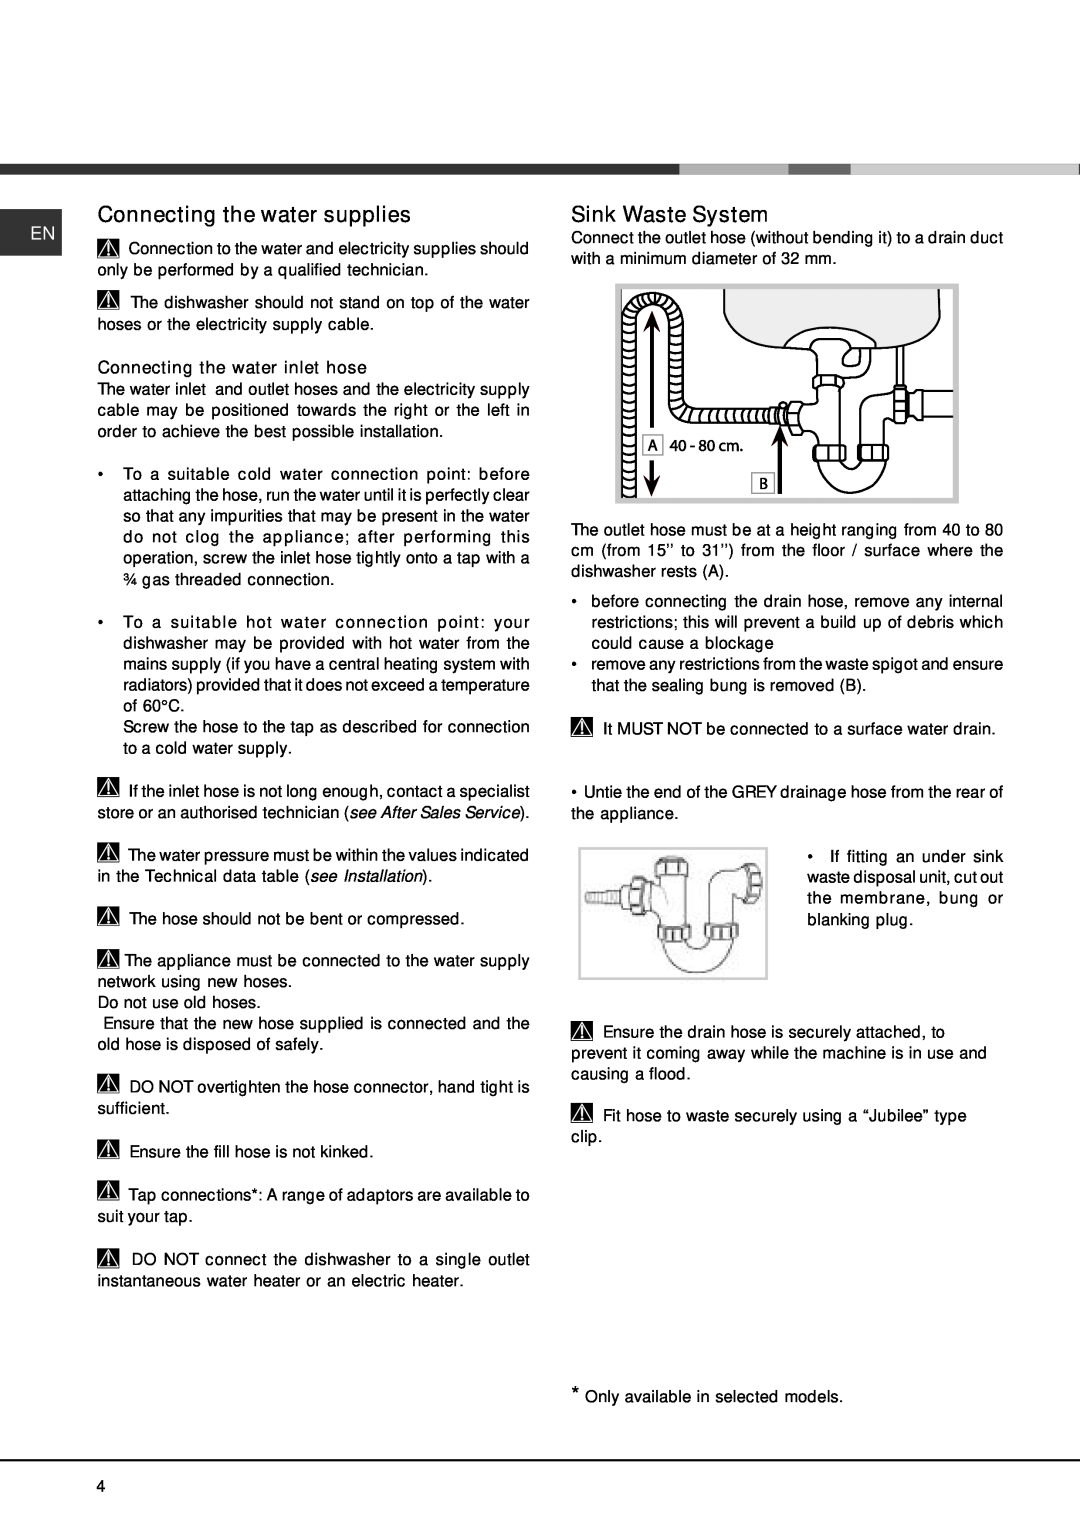 Hotpoint 228 manual Connecting the water supplies, Sink Waste System, Connecting the water inlet hose 